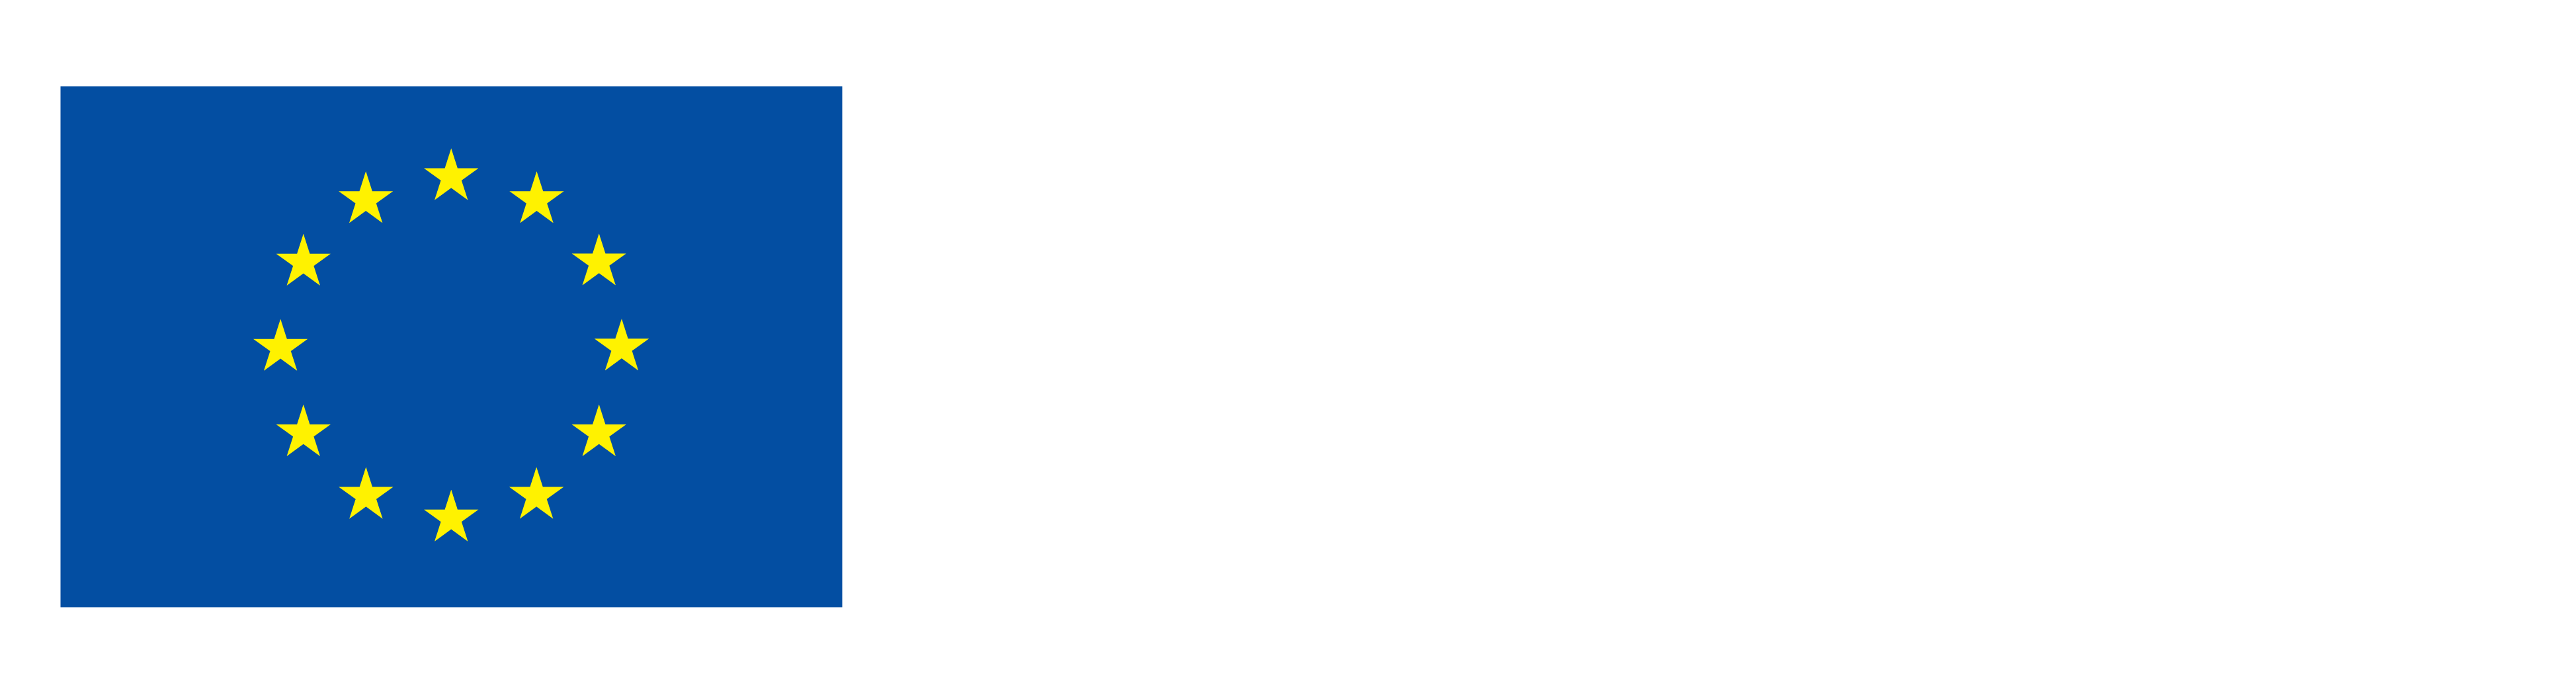 EN Funded by the European Union_NEG